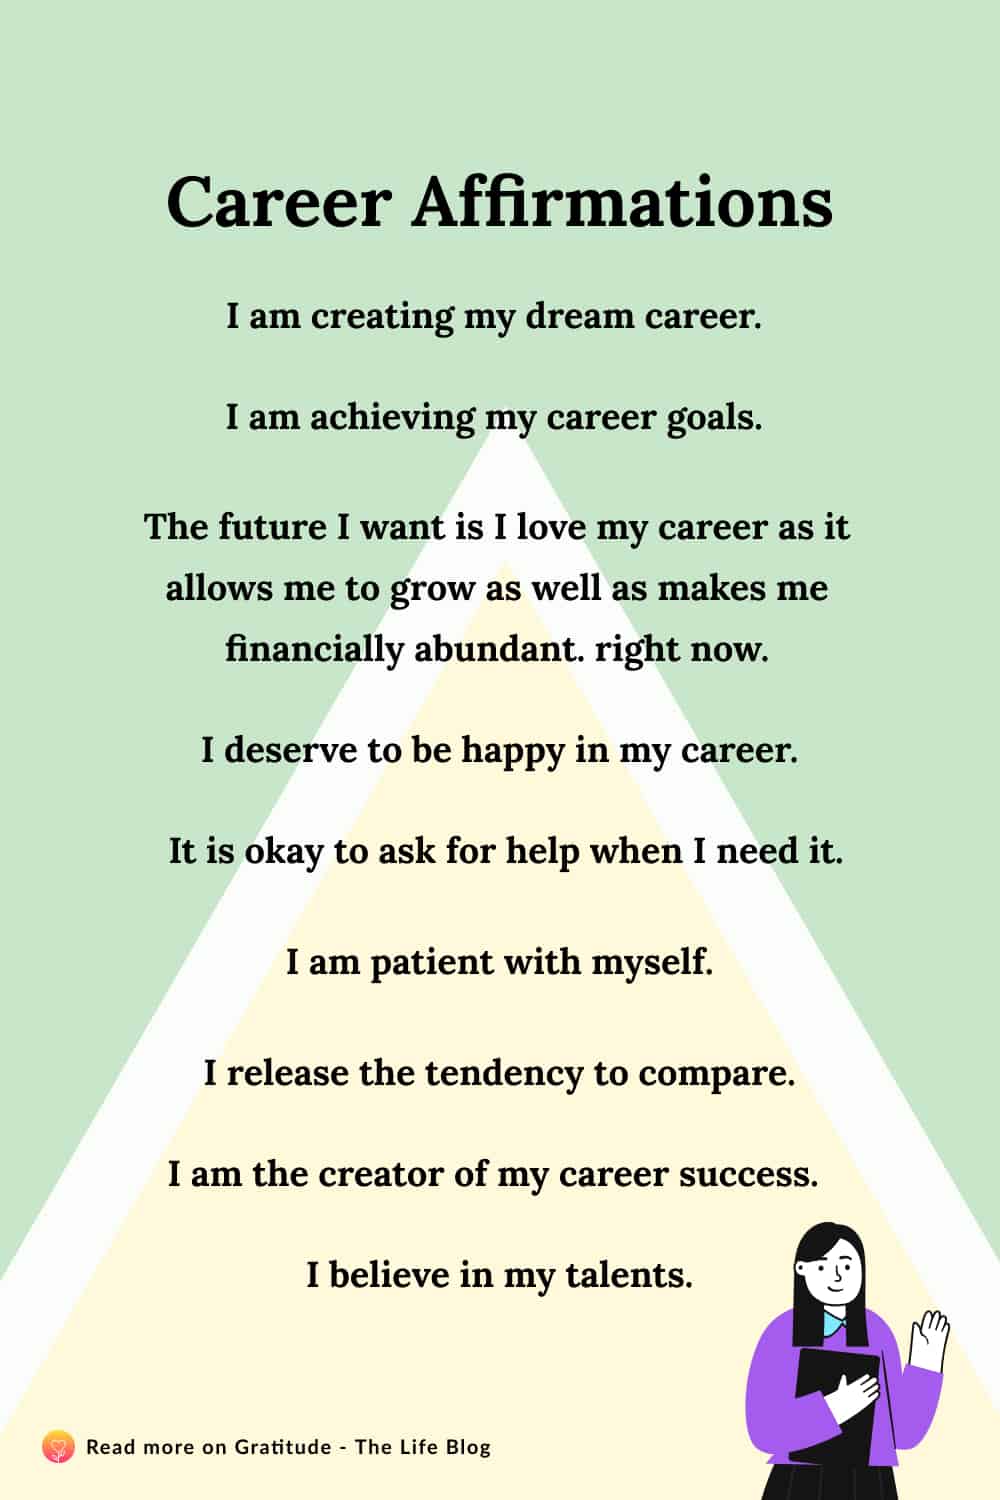 Image with list of career affirmations